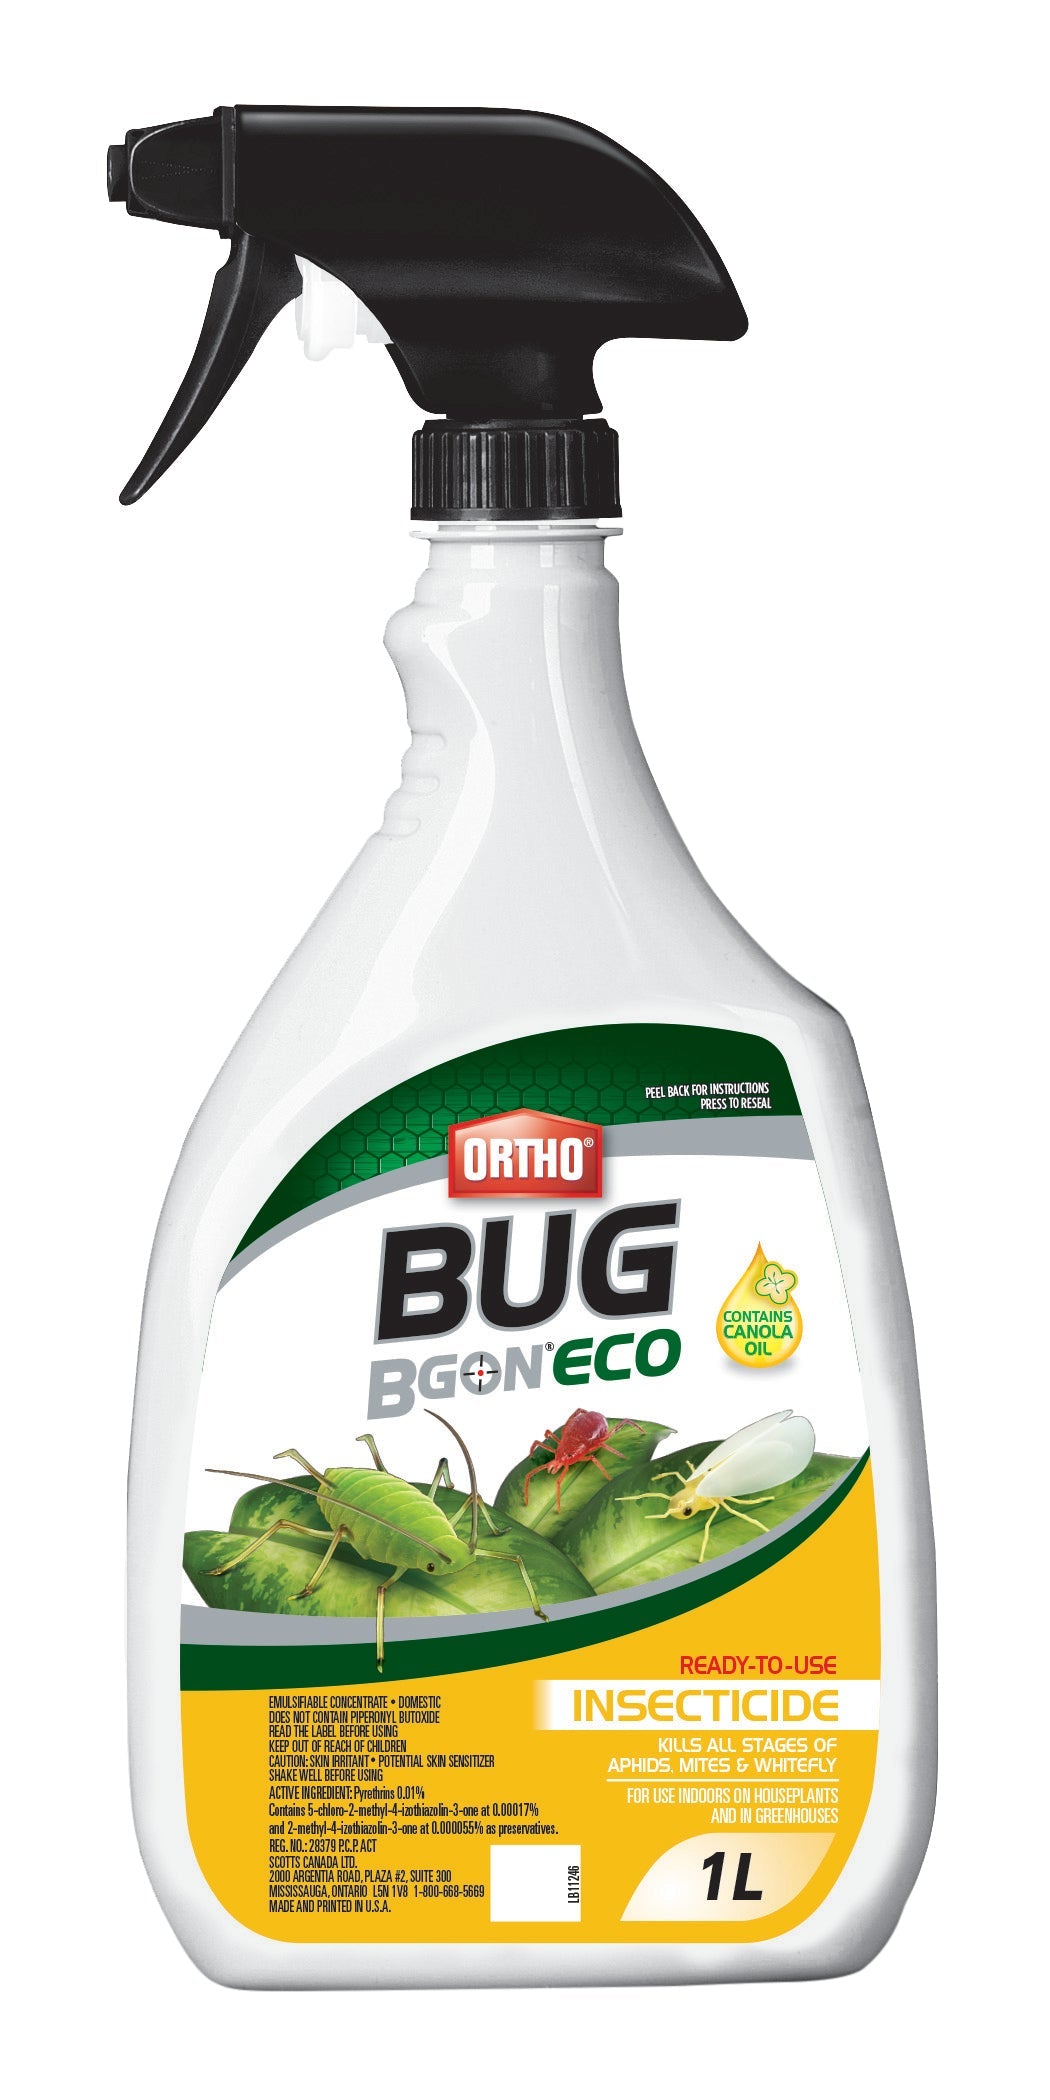 Ortho® Bug B Gon® ECO insecticide - Ready-to-Use